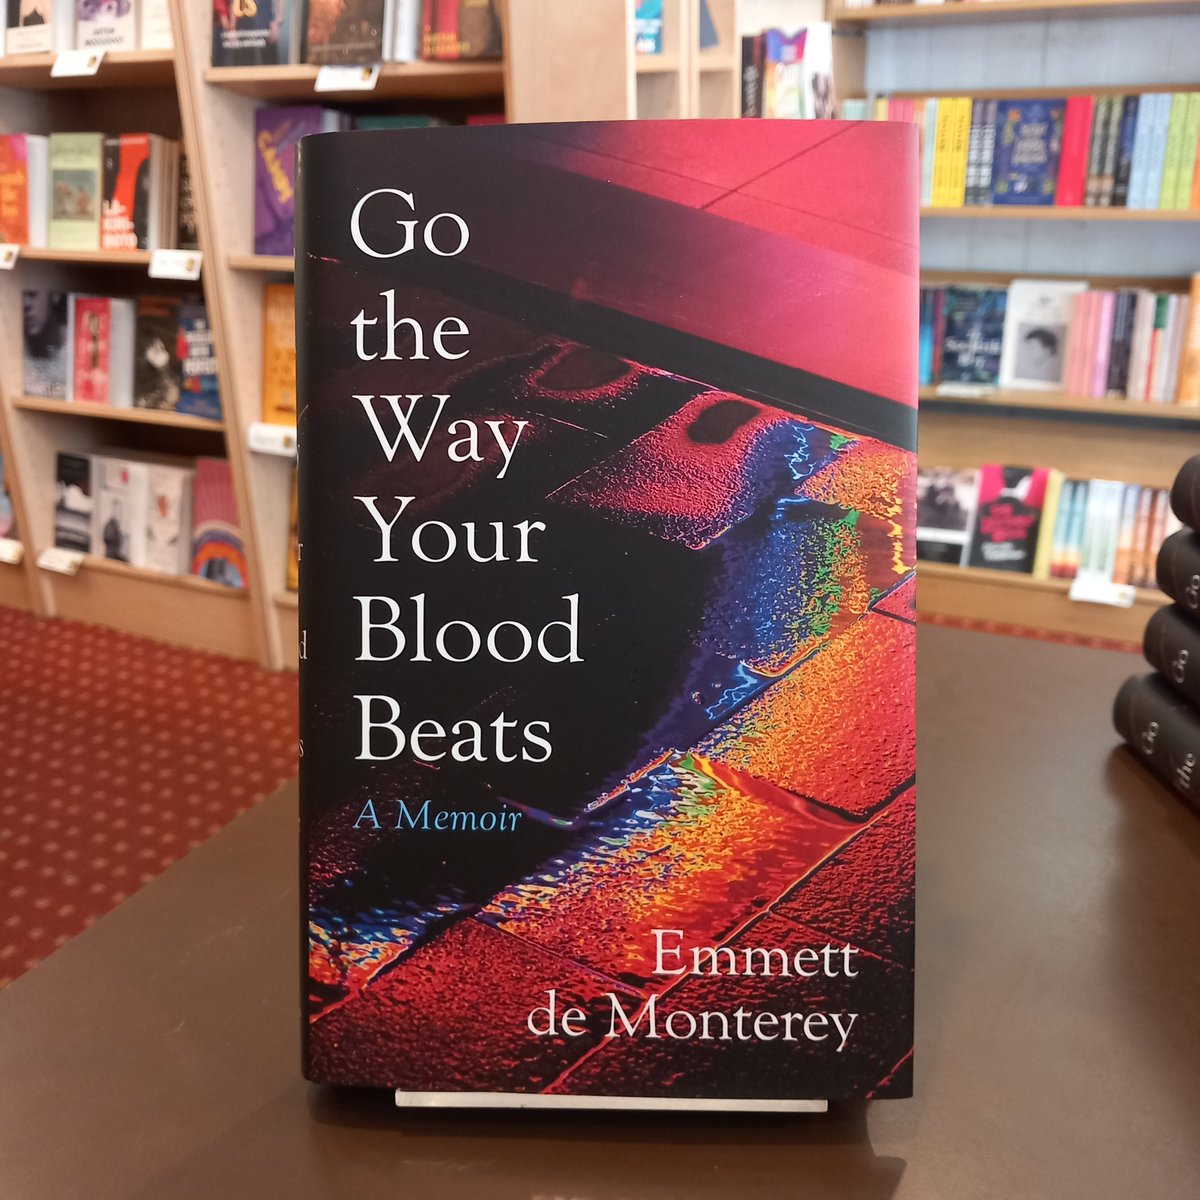 Emmett de Monterey's memoir GO THE WAY YOUR BLOOD BEATS exploring being gay and disabled in 1980s London has just been published and we have signed copies. Lovely piece by Andrew McMillan on it in the Guardian recently when it was Book of the Day.